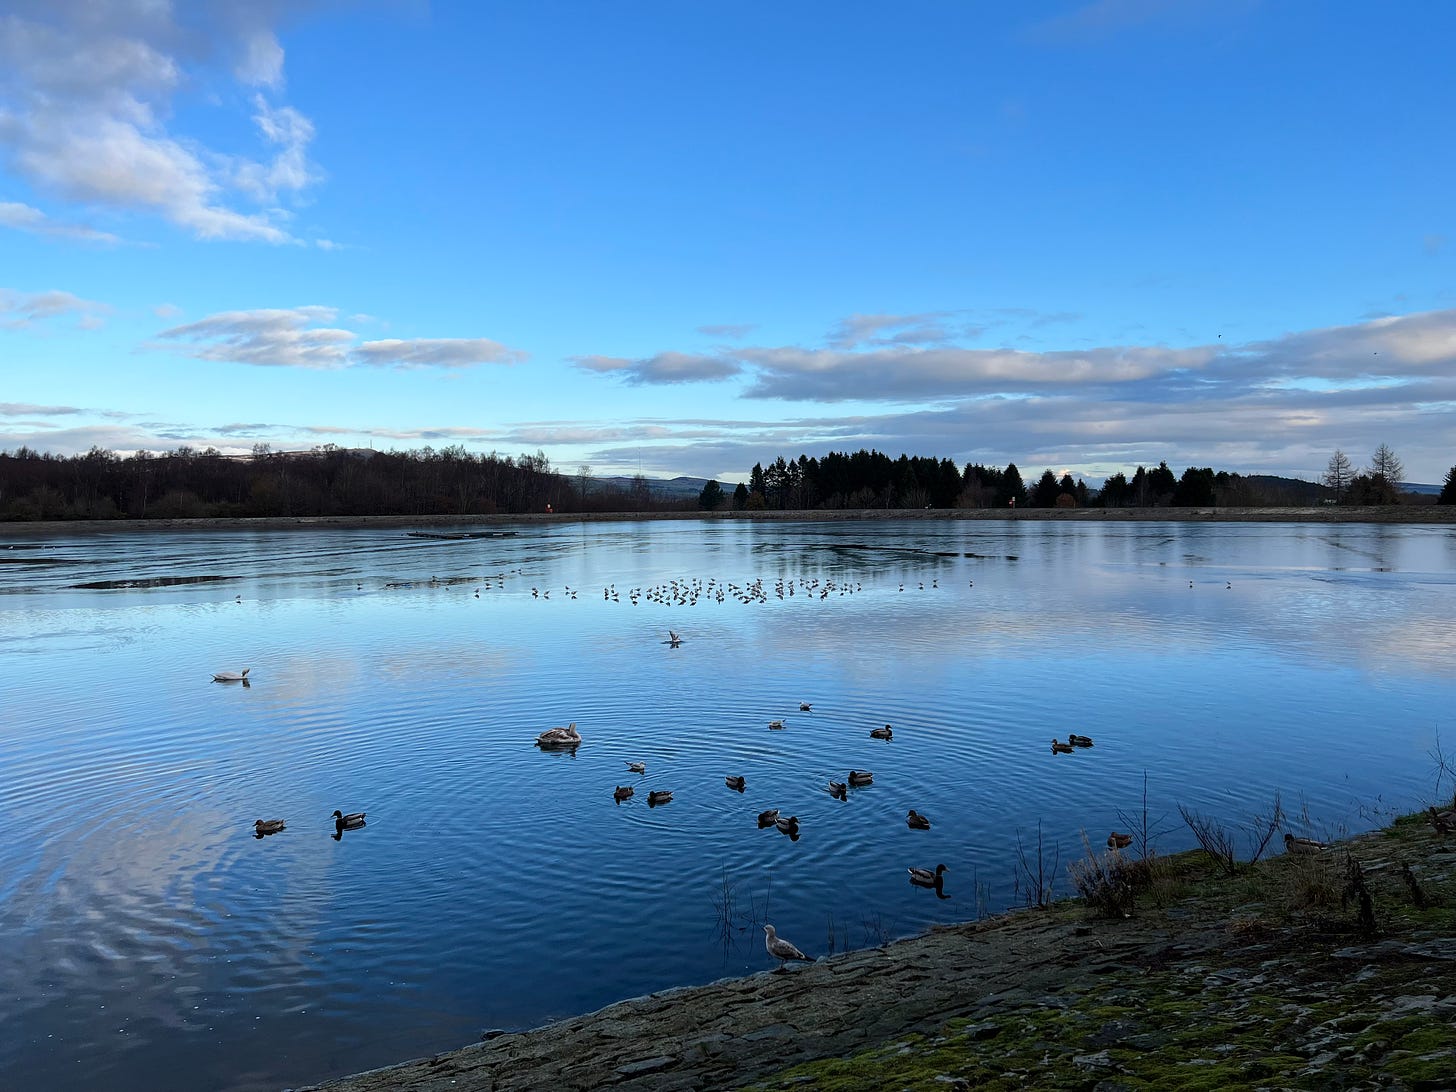 Blue sky over a calm, blue reservoir with swans and other waterbirds floating on the surface